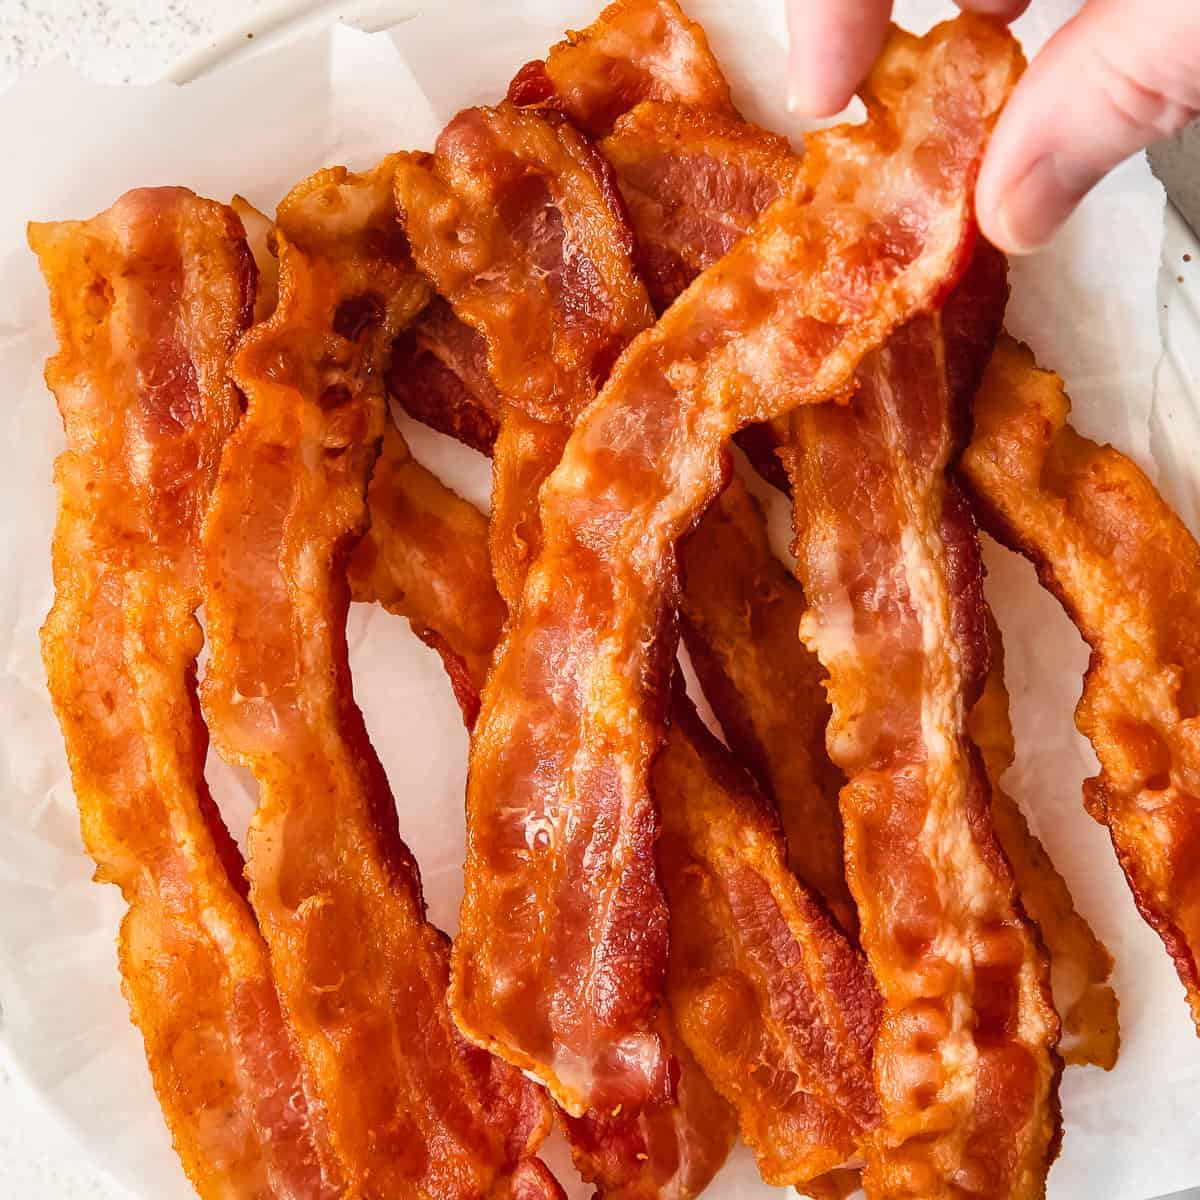 https://fitfoodiefinds.com/wp-content/uploads/2021/12/Bacon-on-the-stove-04-1.jpg